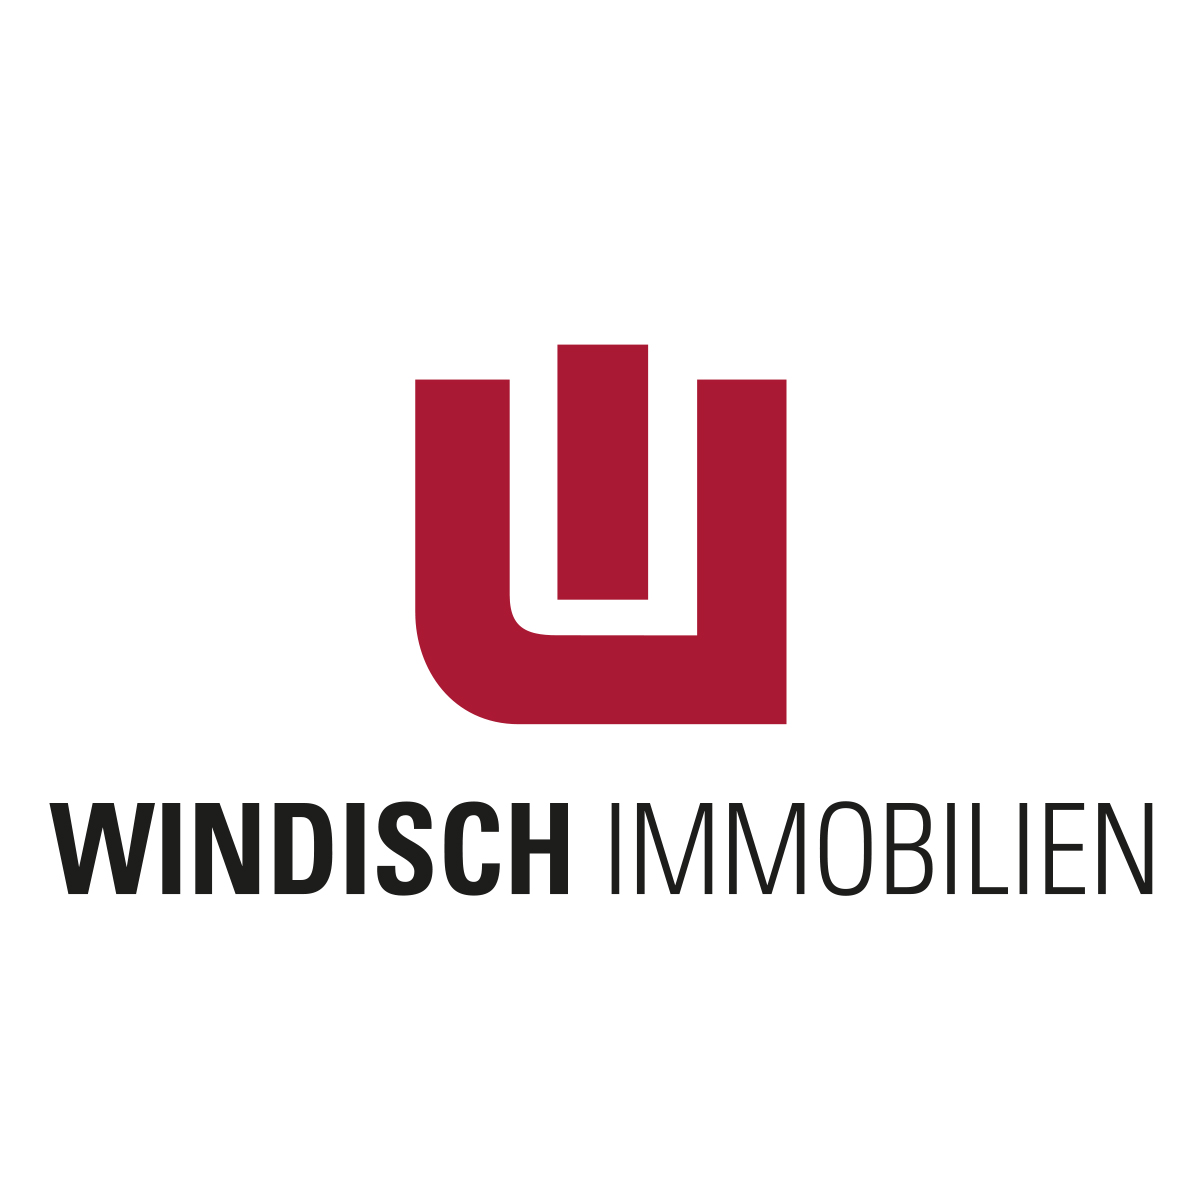 WINDISCH IMMOBILIEN in Inning am Ammersee - Logo